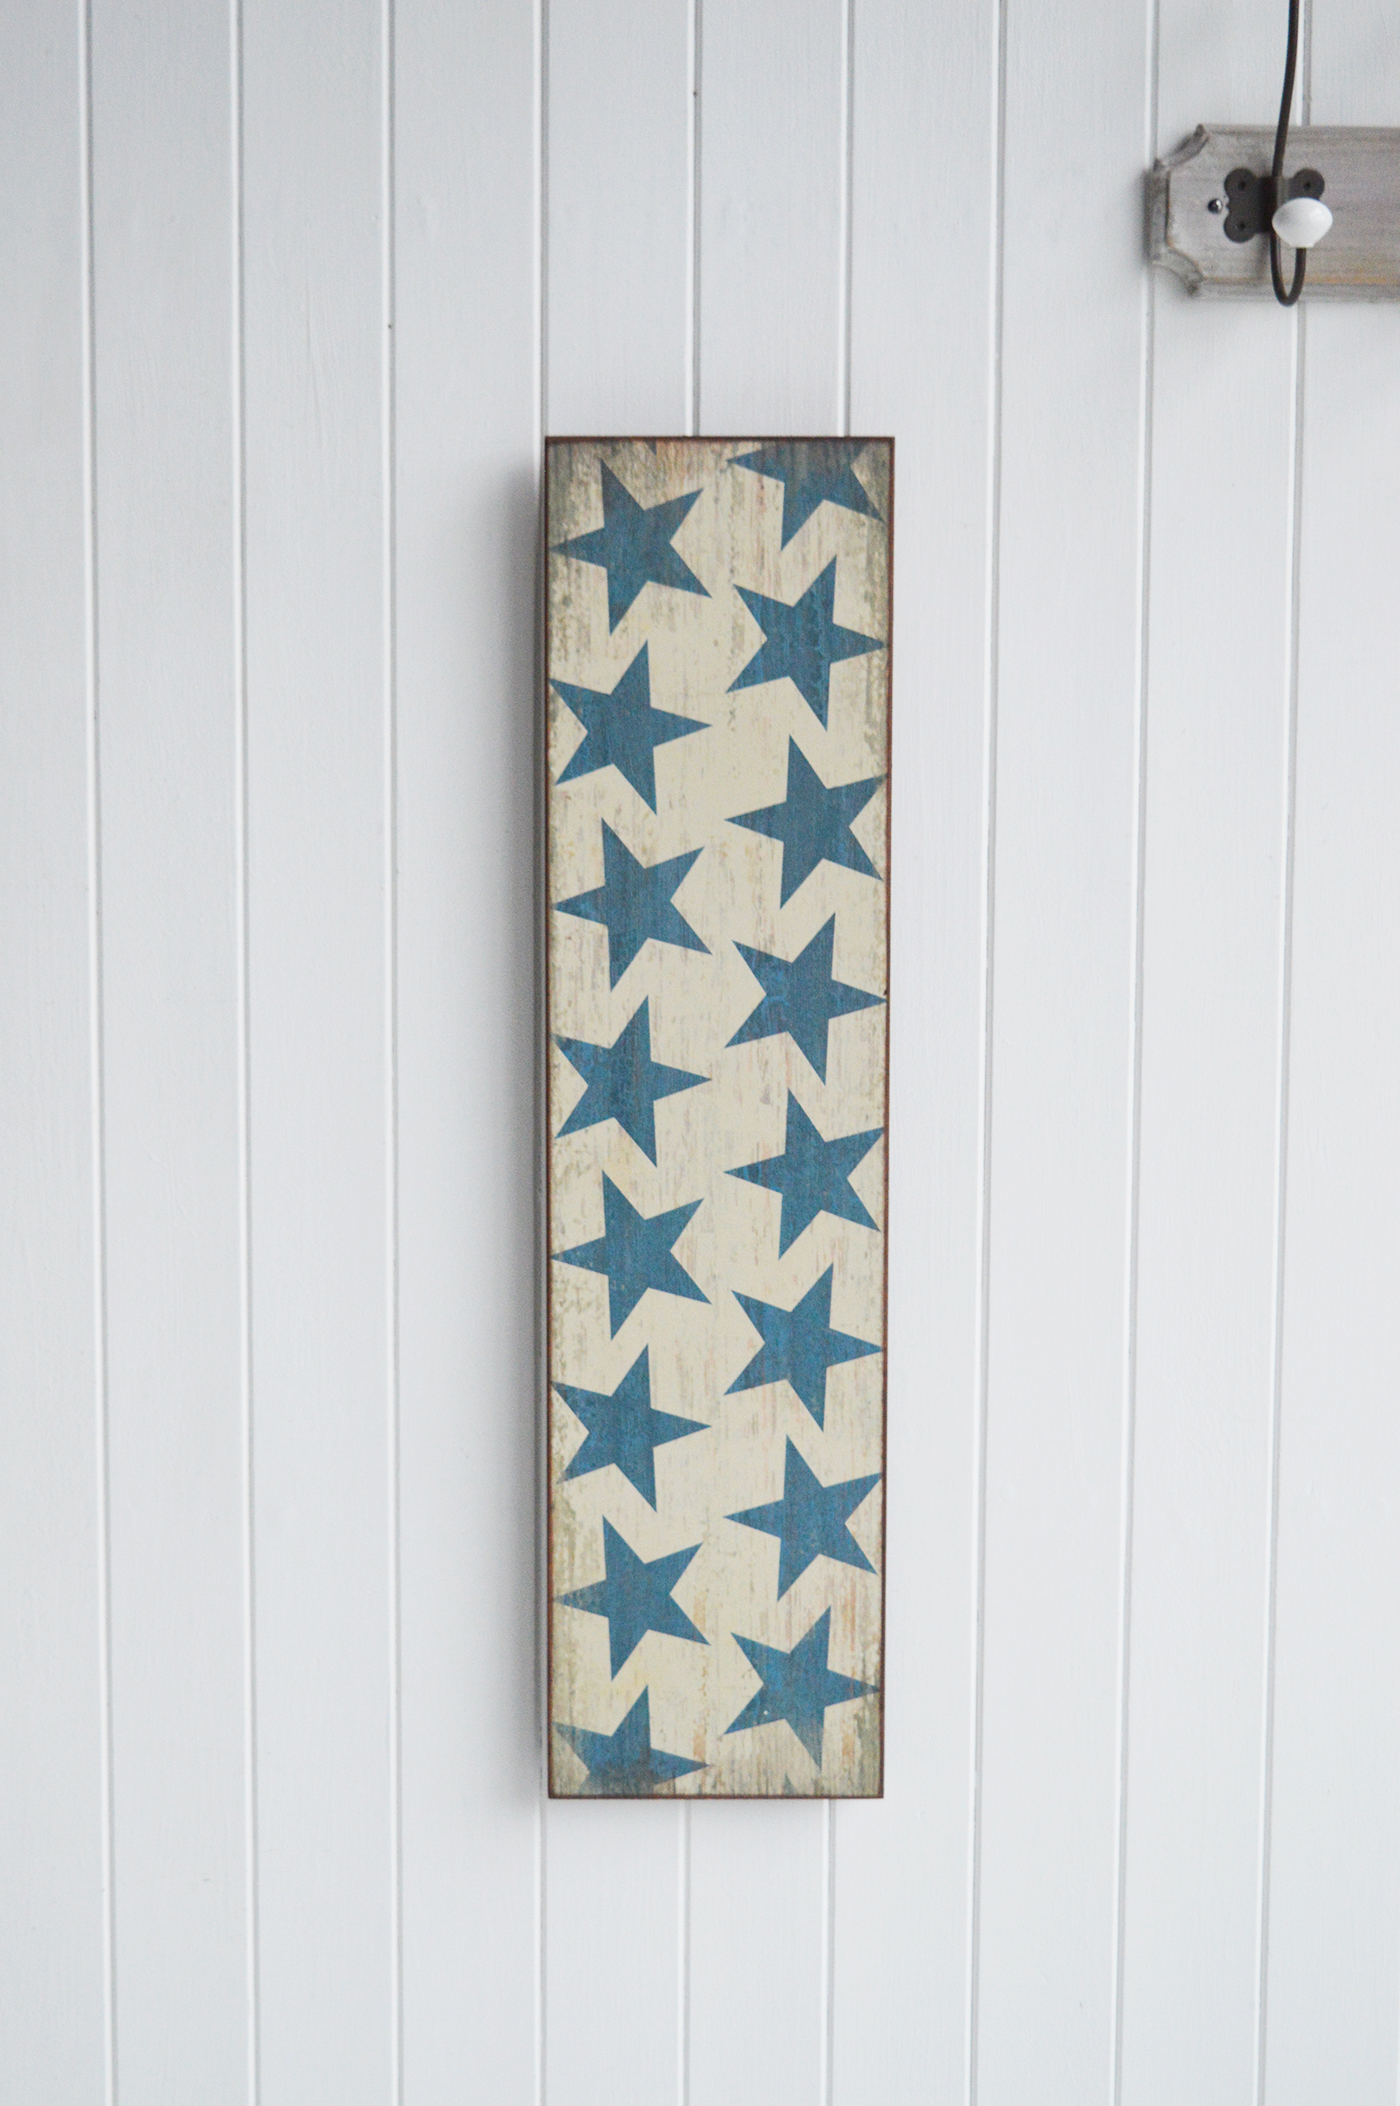 Large narrow sign with stars in blues and white for a traditional New England look from The White Lighthouse Furniture